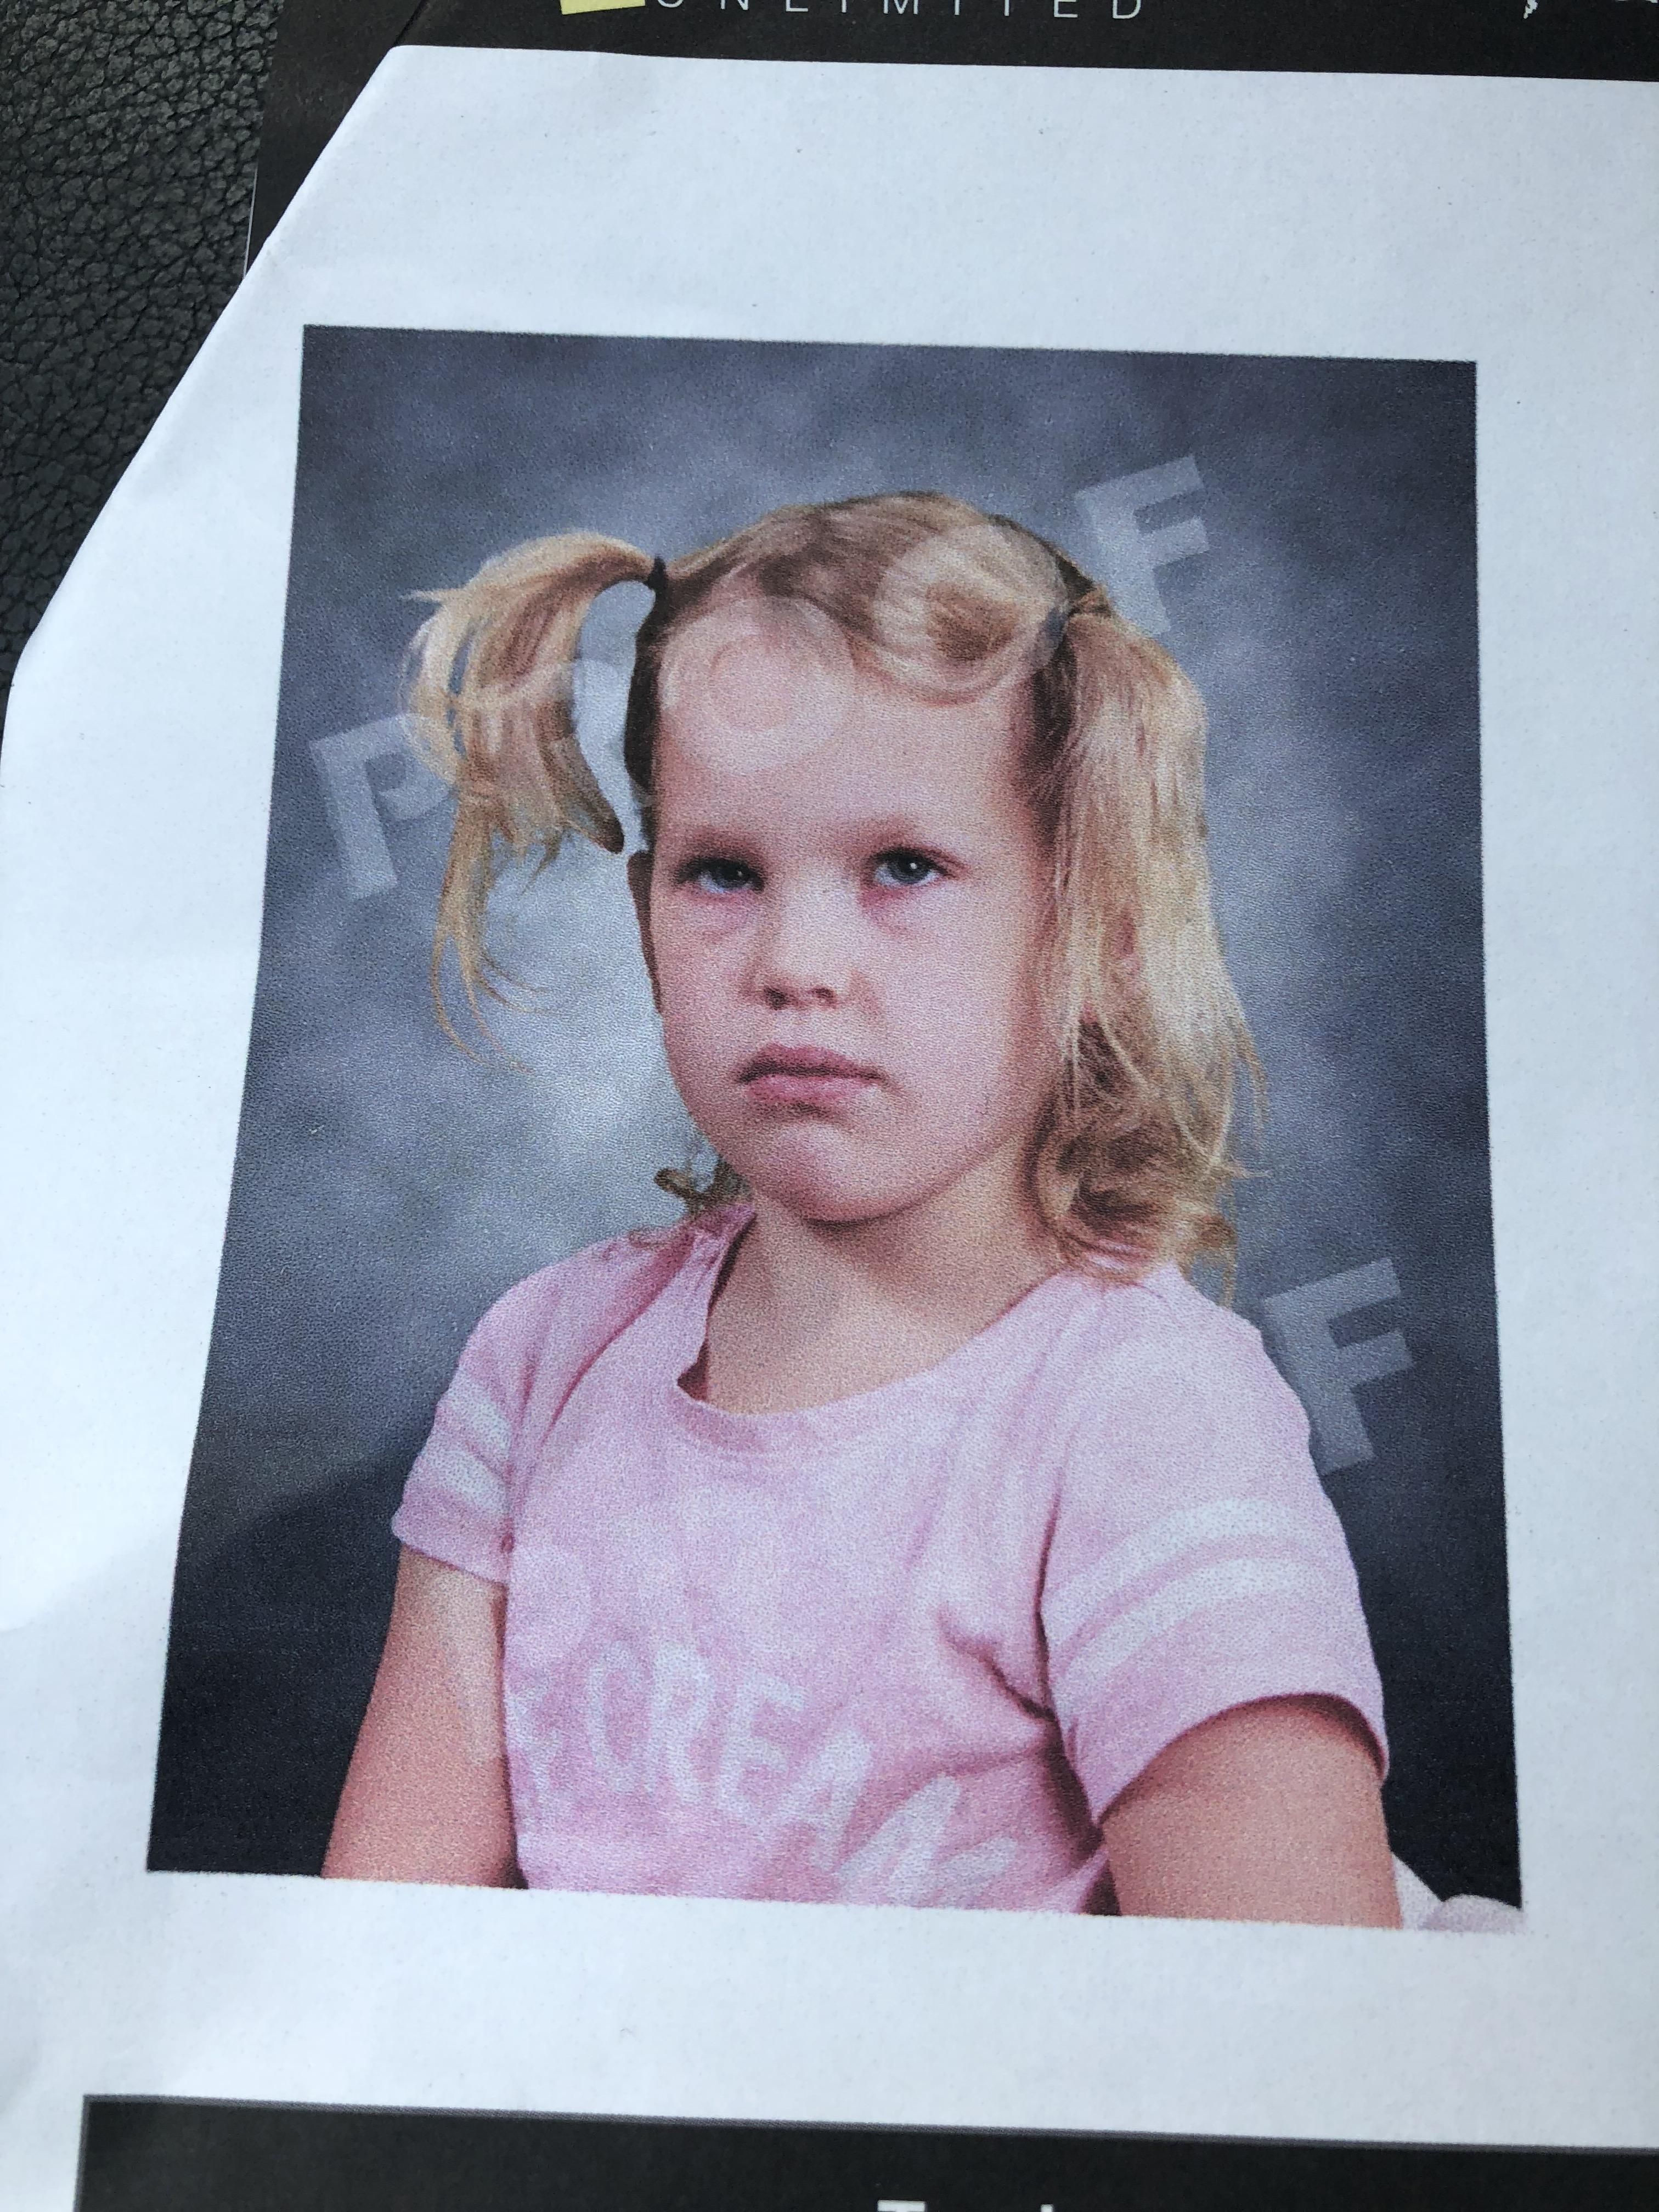 I got my daughters daycare photo proofs in today. Ordering this one in the largest size possible.